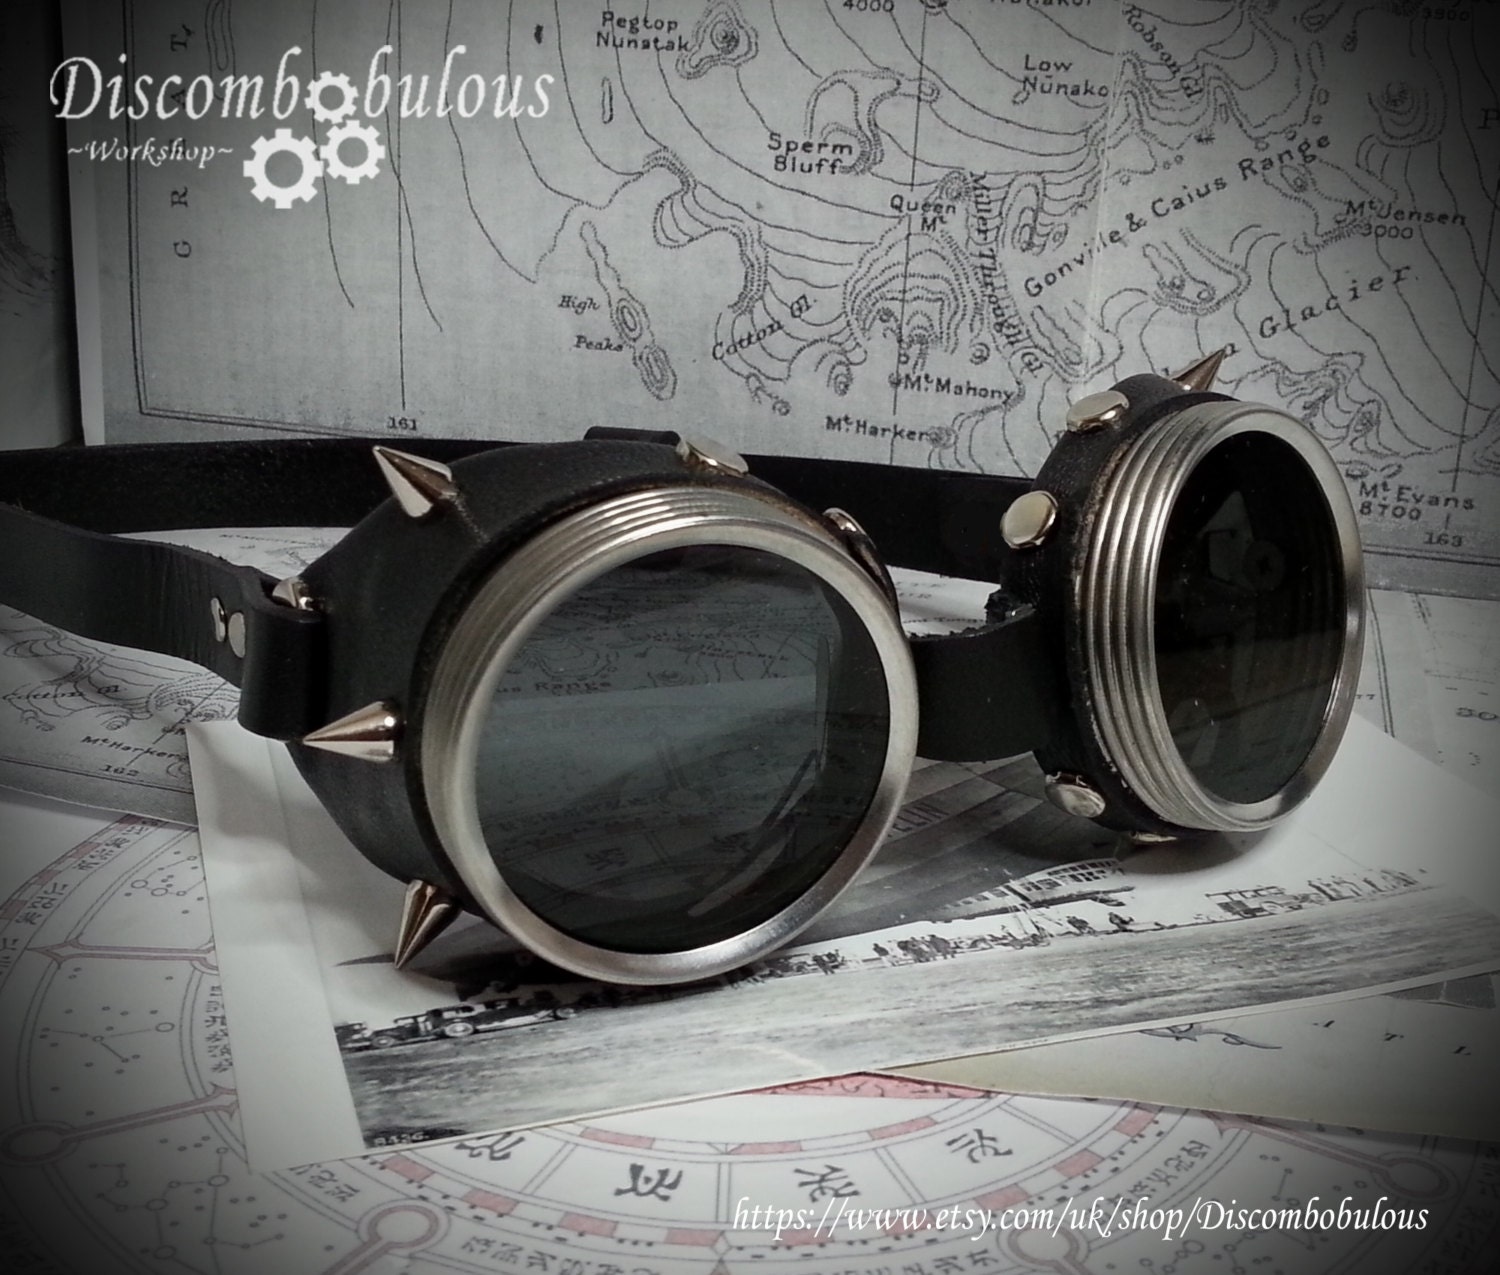 Vintage Steampunk Goggles - The Geek Trove